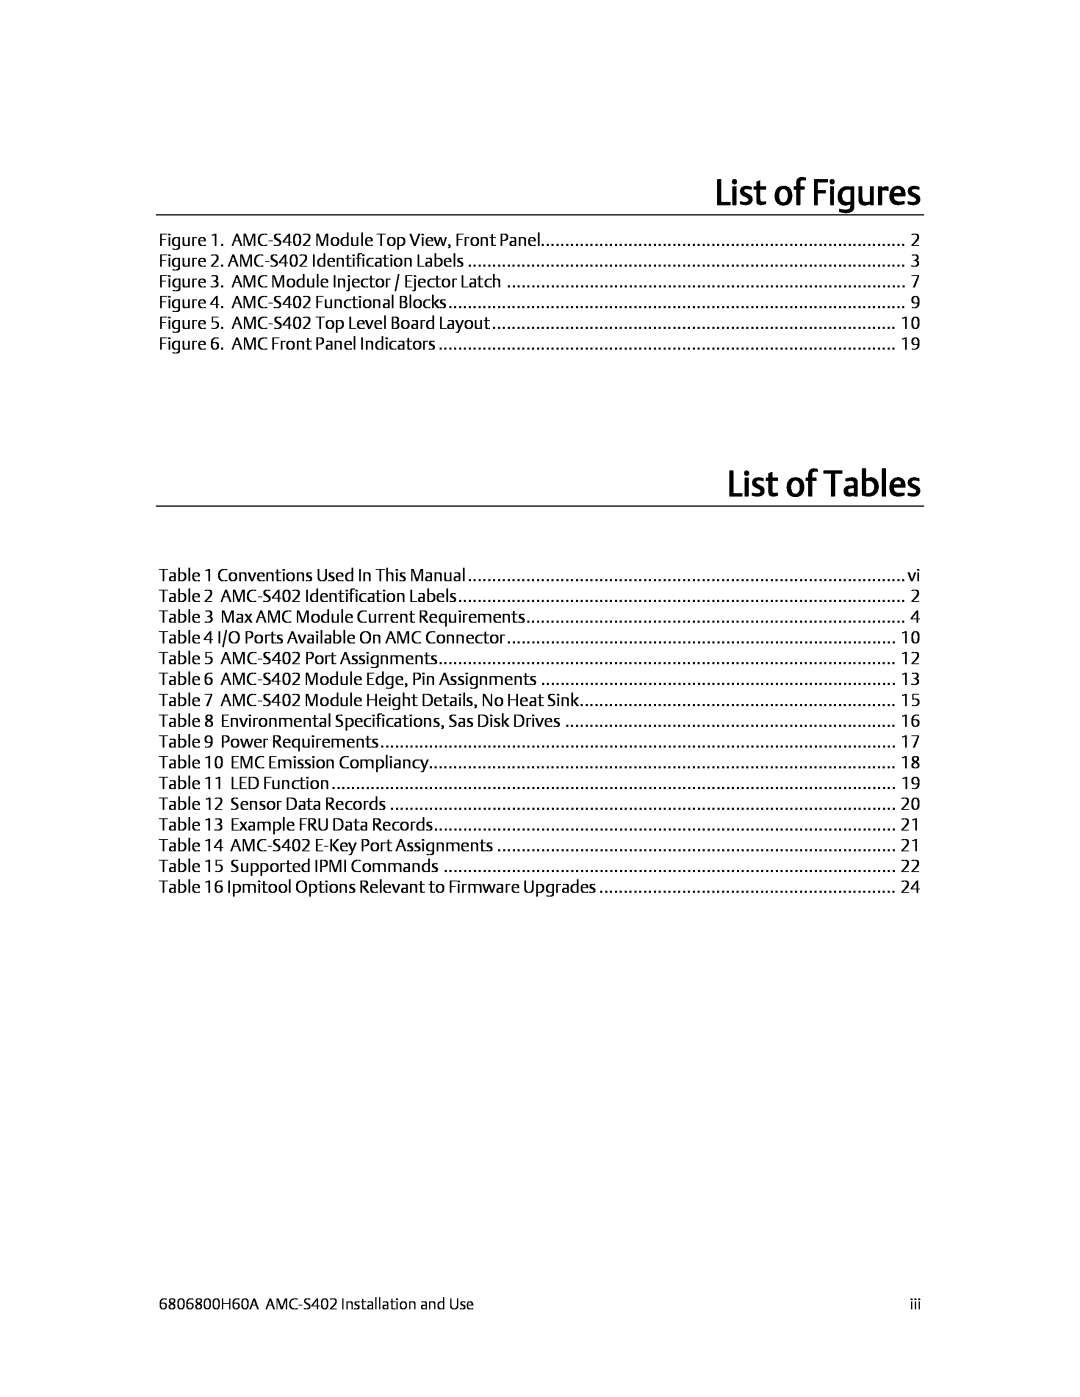 Emerson AMC-S402 manual List of Figures, List of Tables 